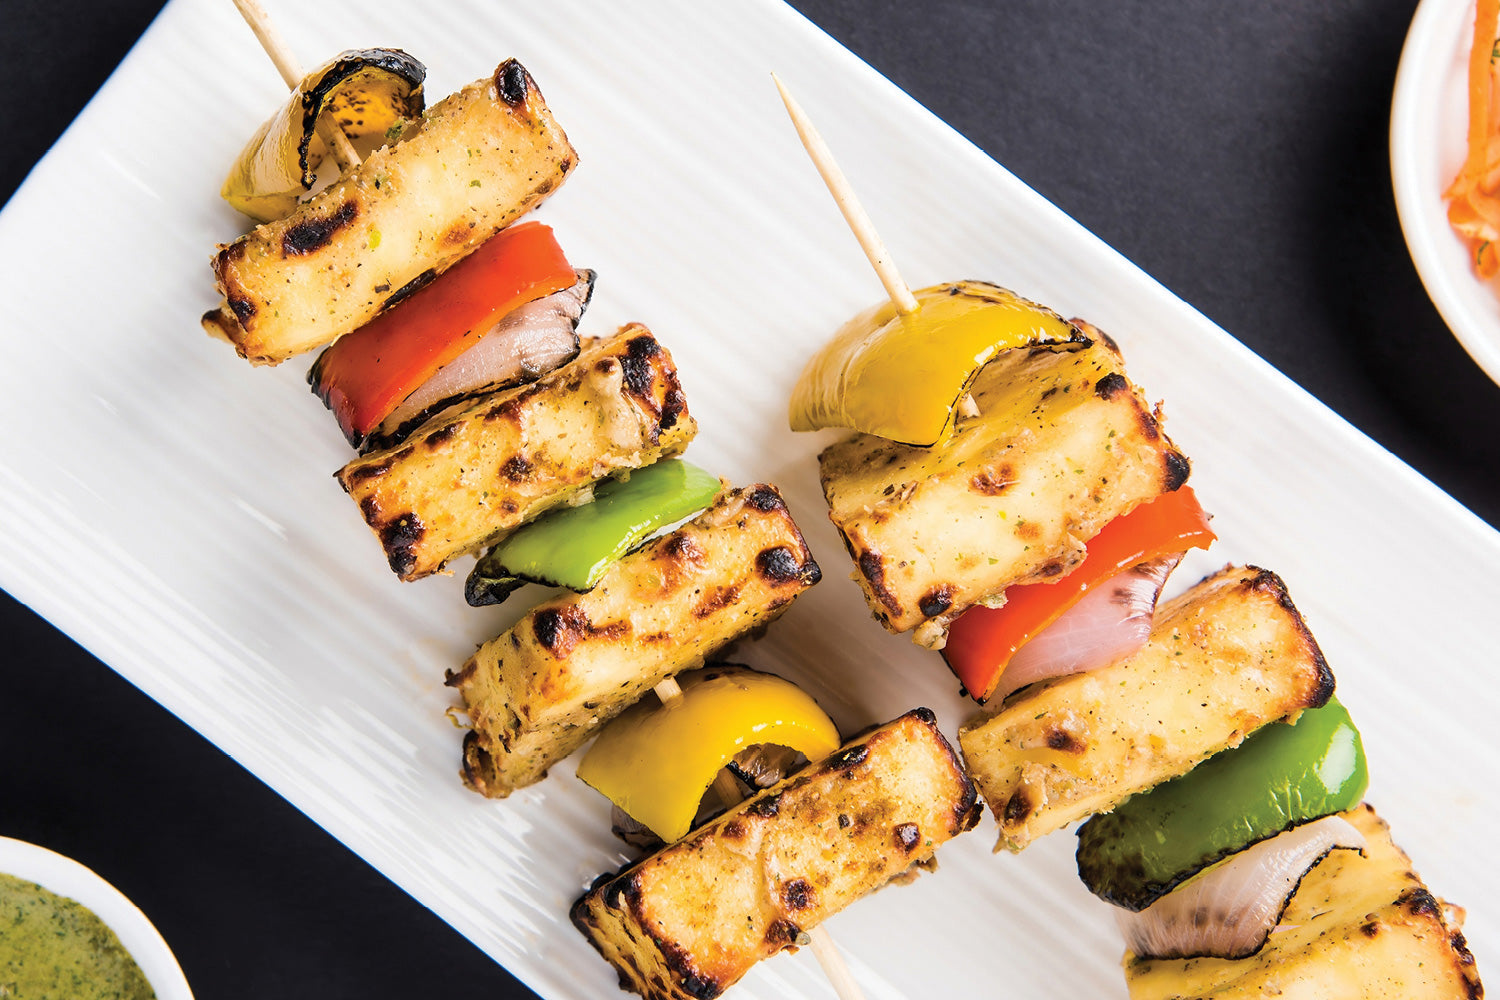 Simply Masala Oven Roasted Tandoori Style Vegetables and paneer or tofu